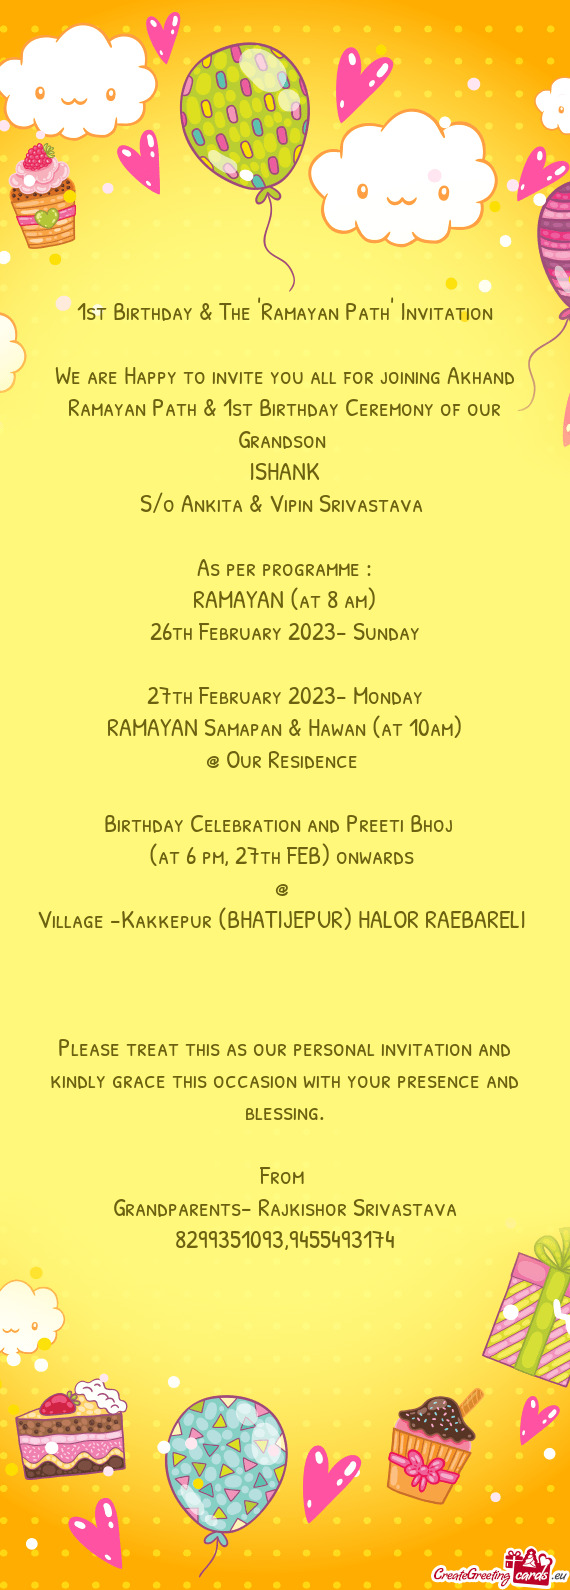 We are Happy to invite you all for joining Akhand Ramayan Path & 1st Birthday Ceremony of our Grands